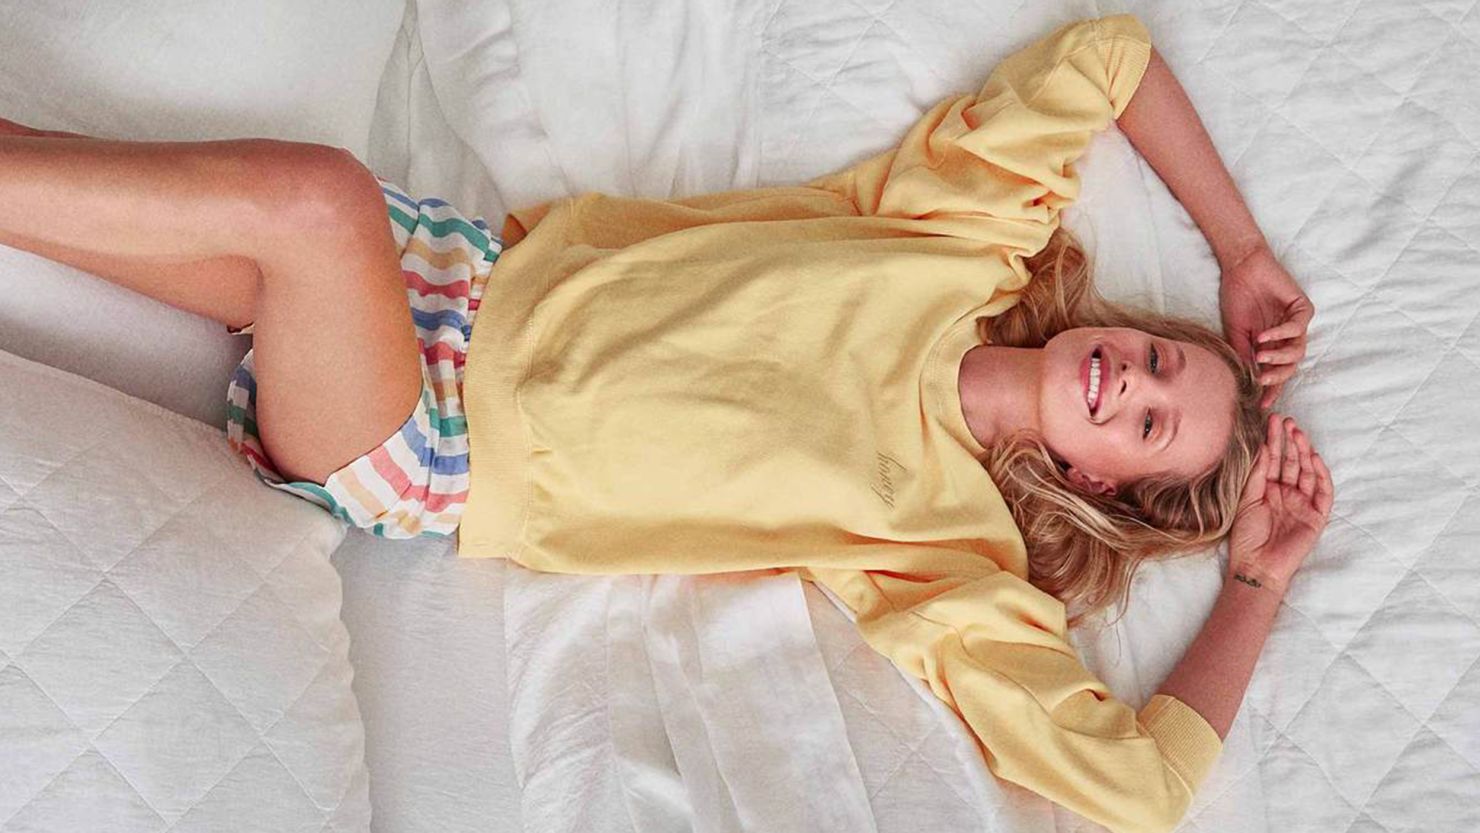 16 Ways To Stay Cool While You Sleep This Summer